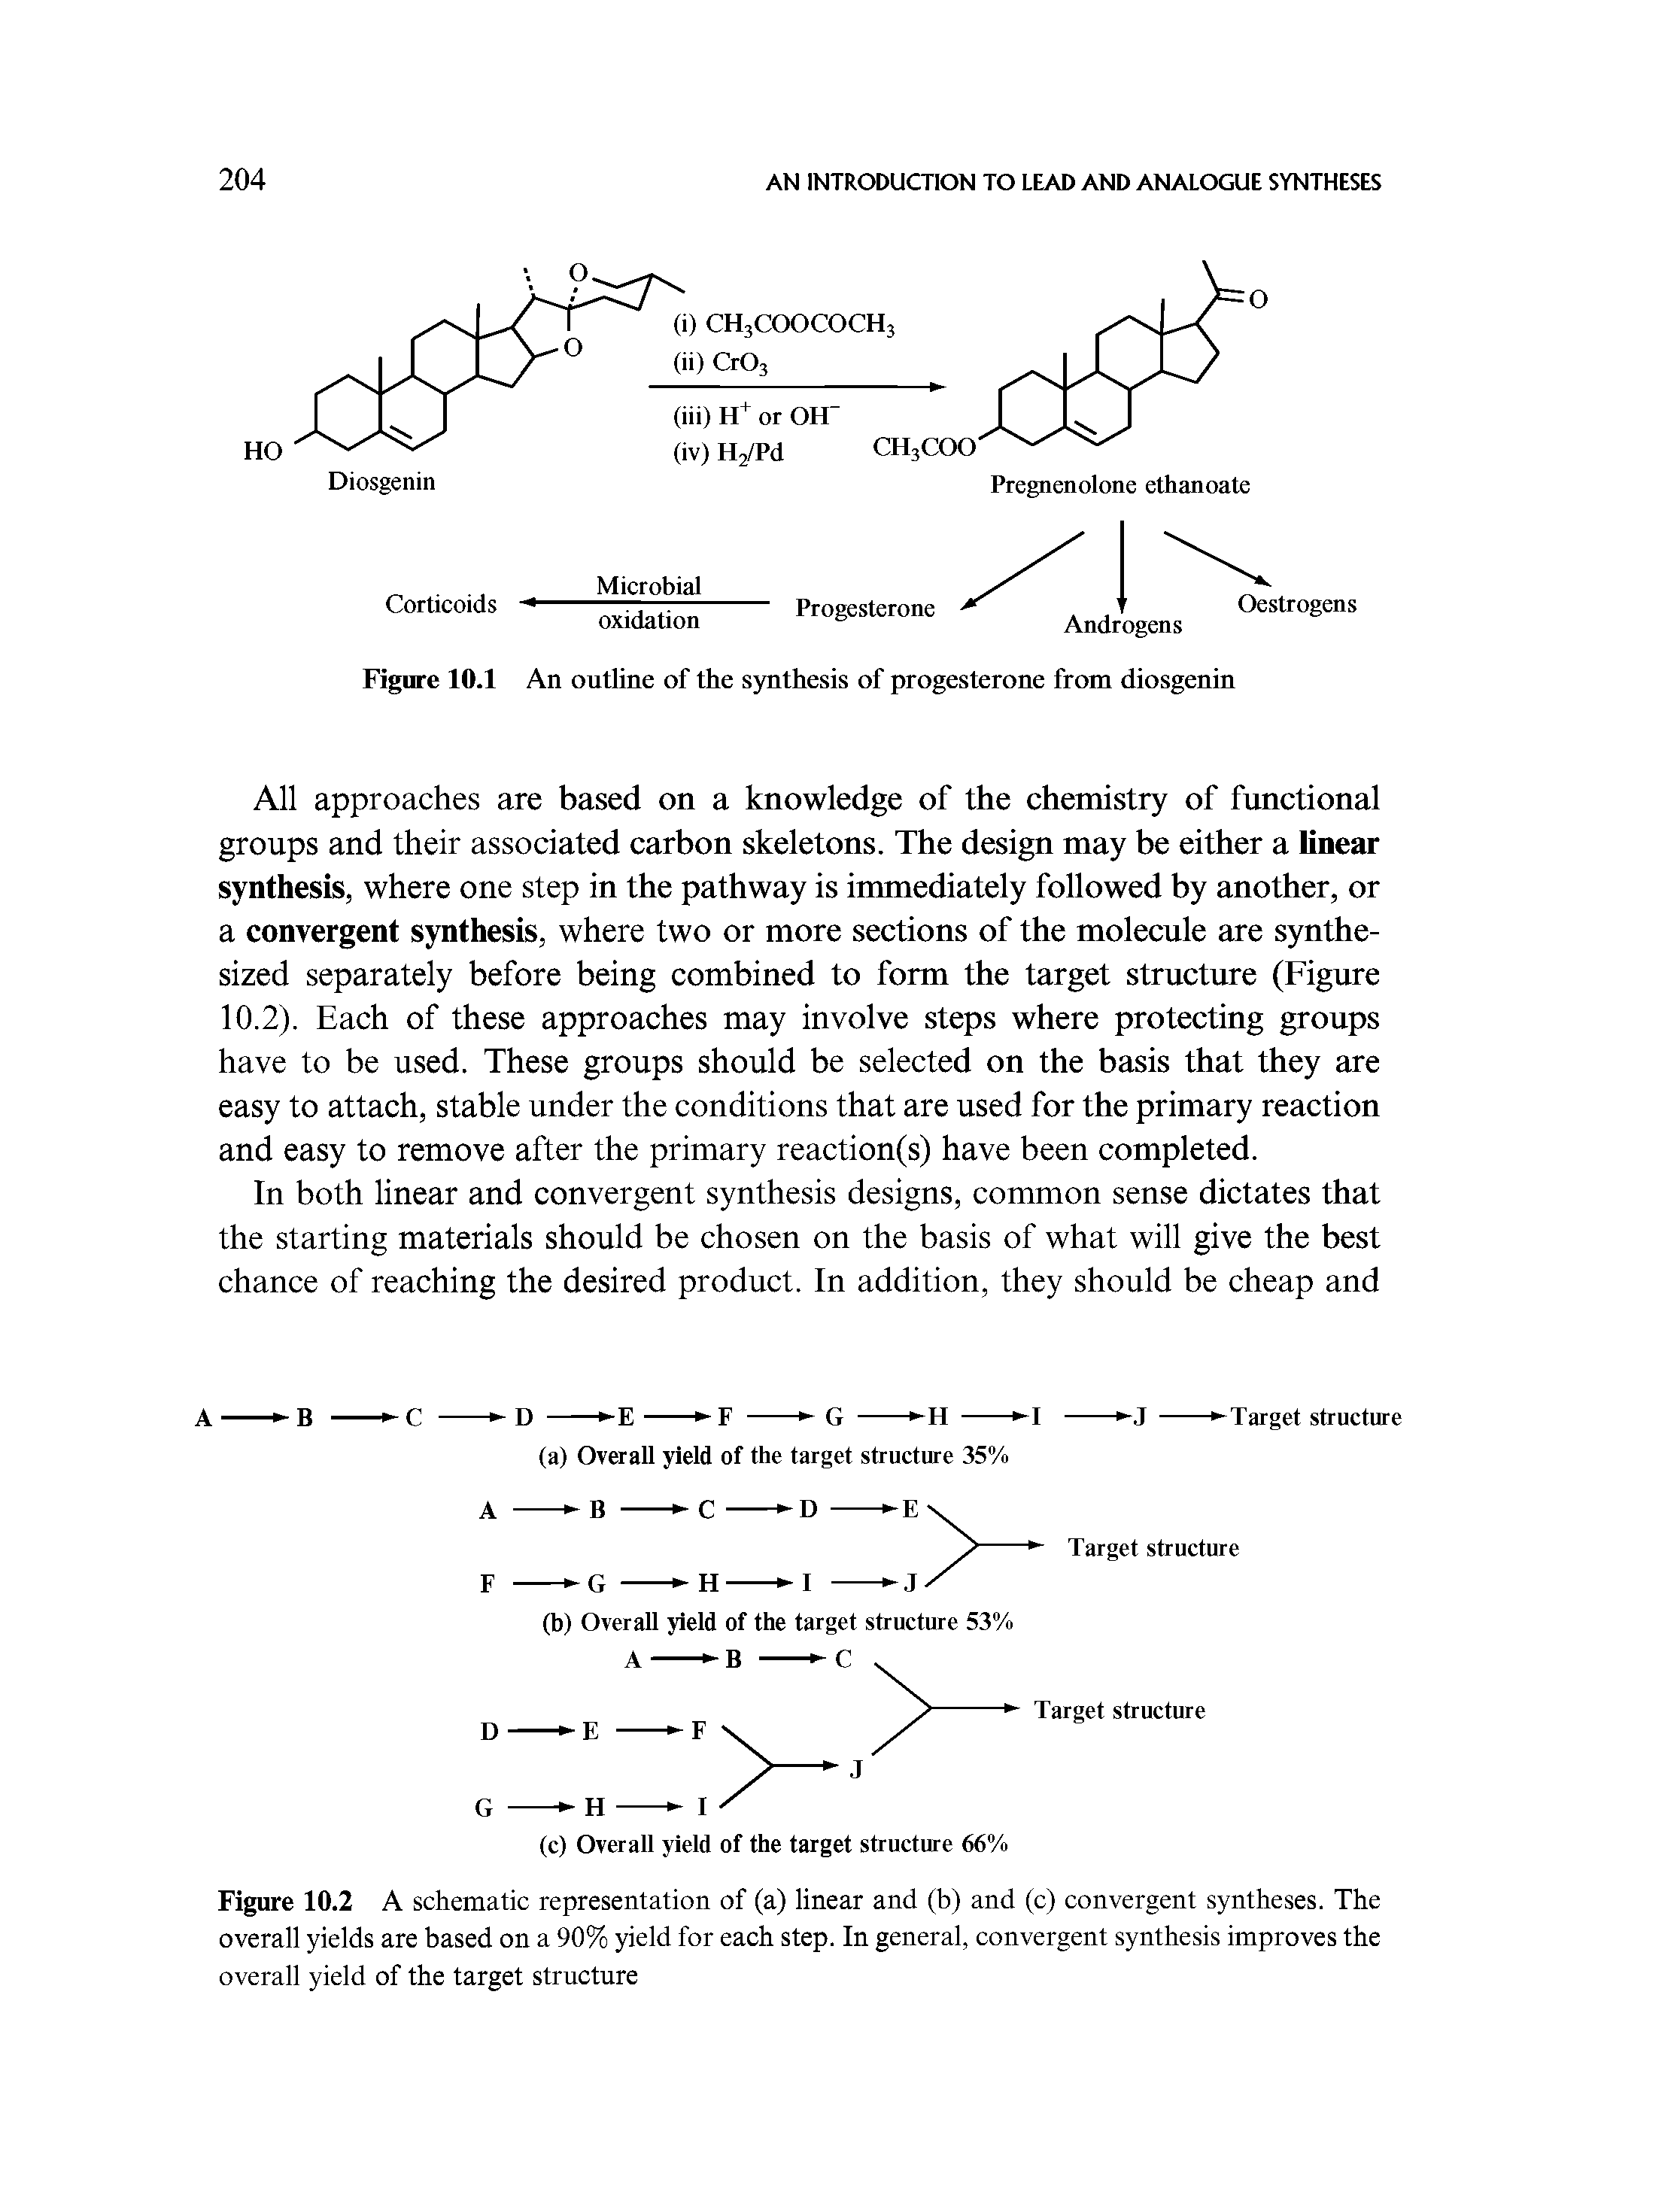 Figure 10.1 An outline of the synthesis of progesterone from diosgenin...